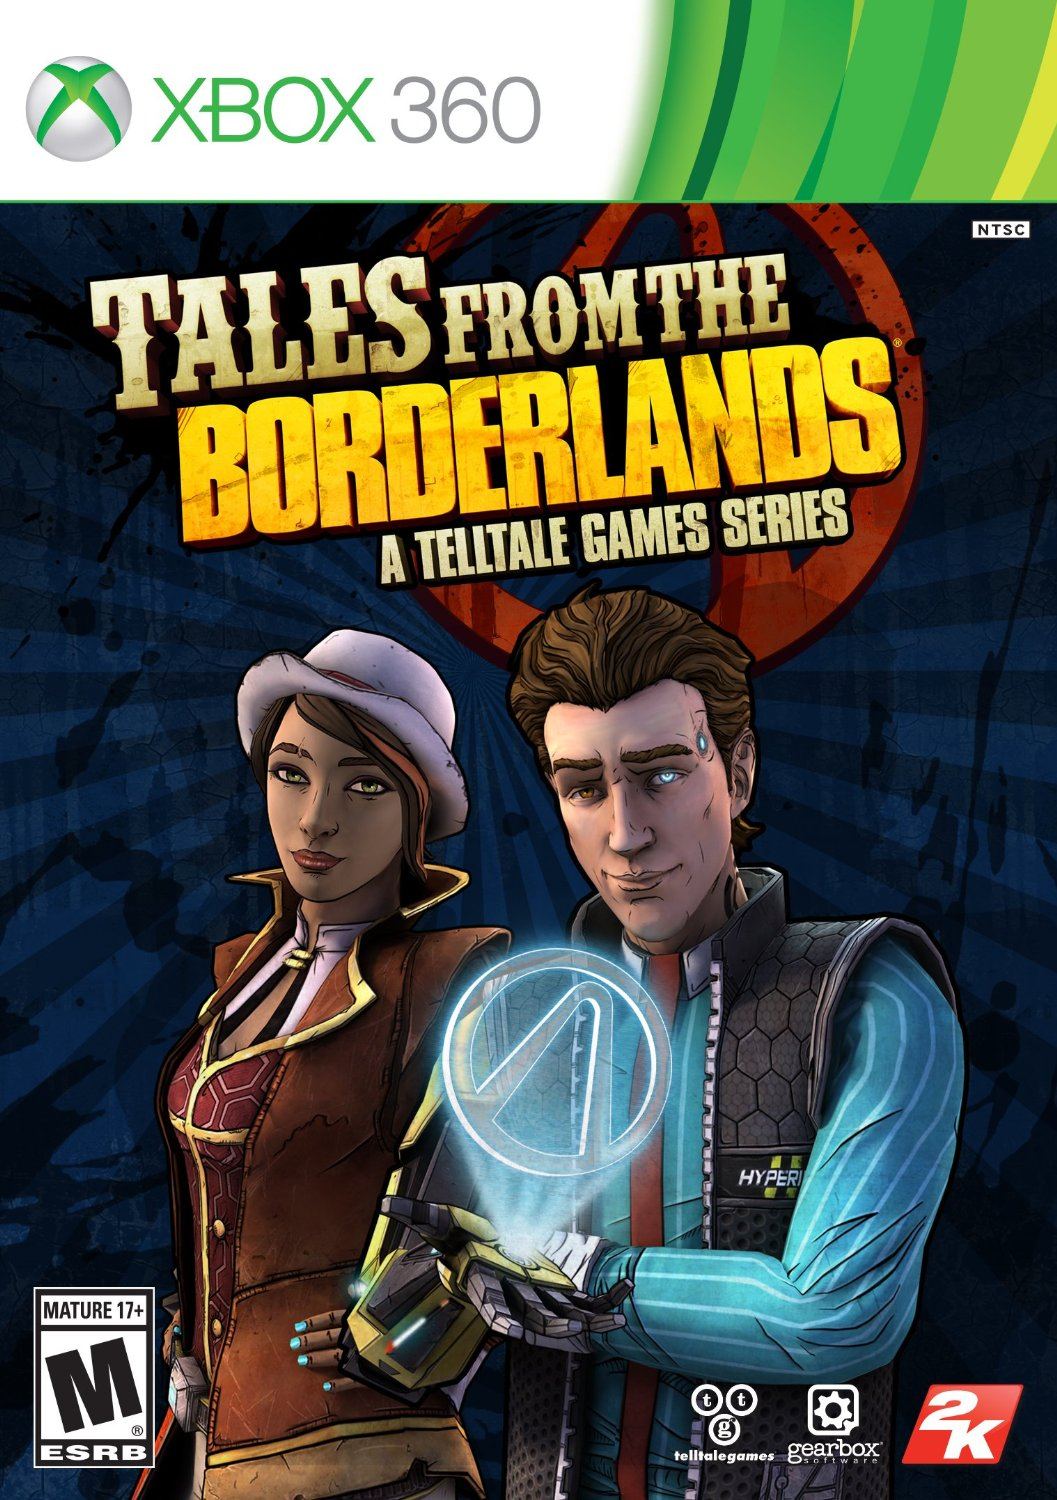   tales from the borderlands a telltale games series